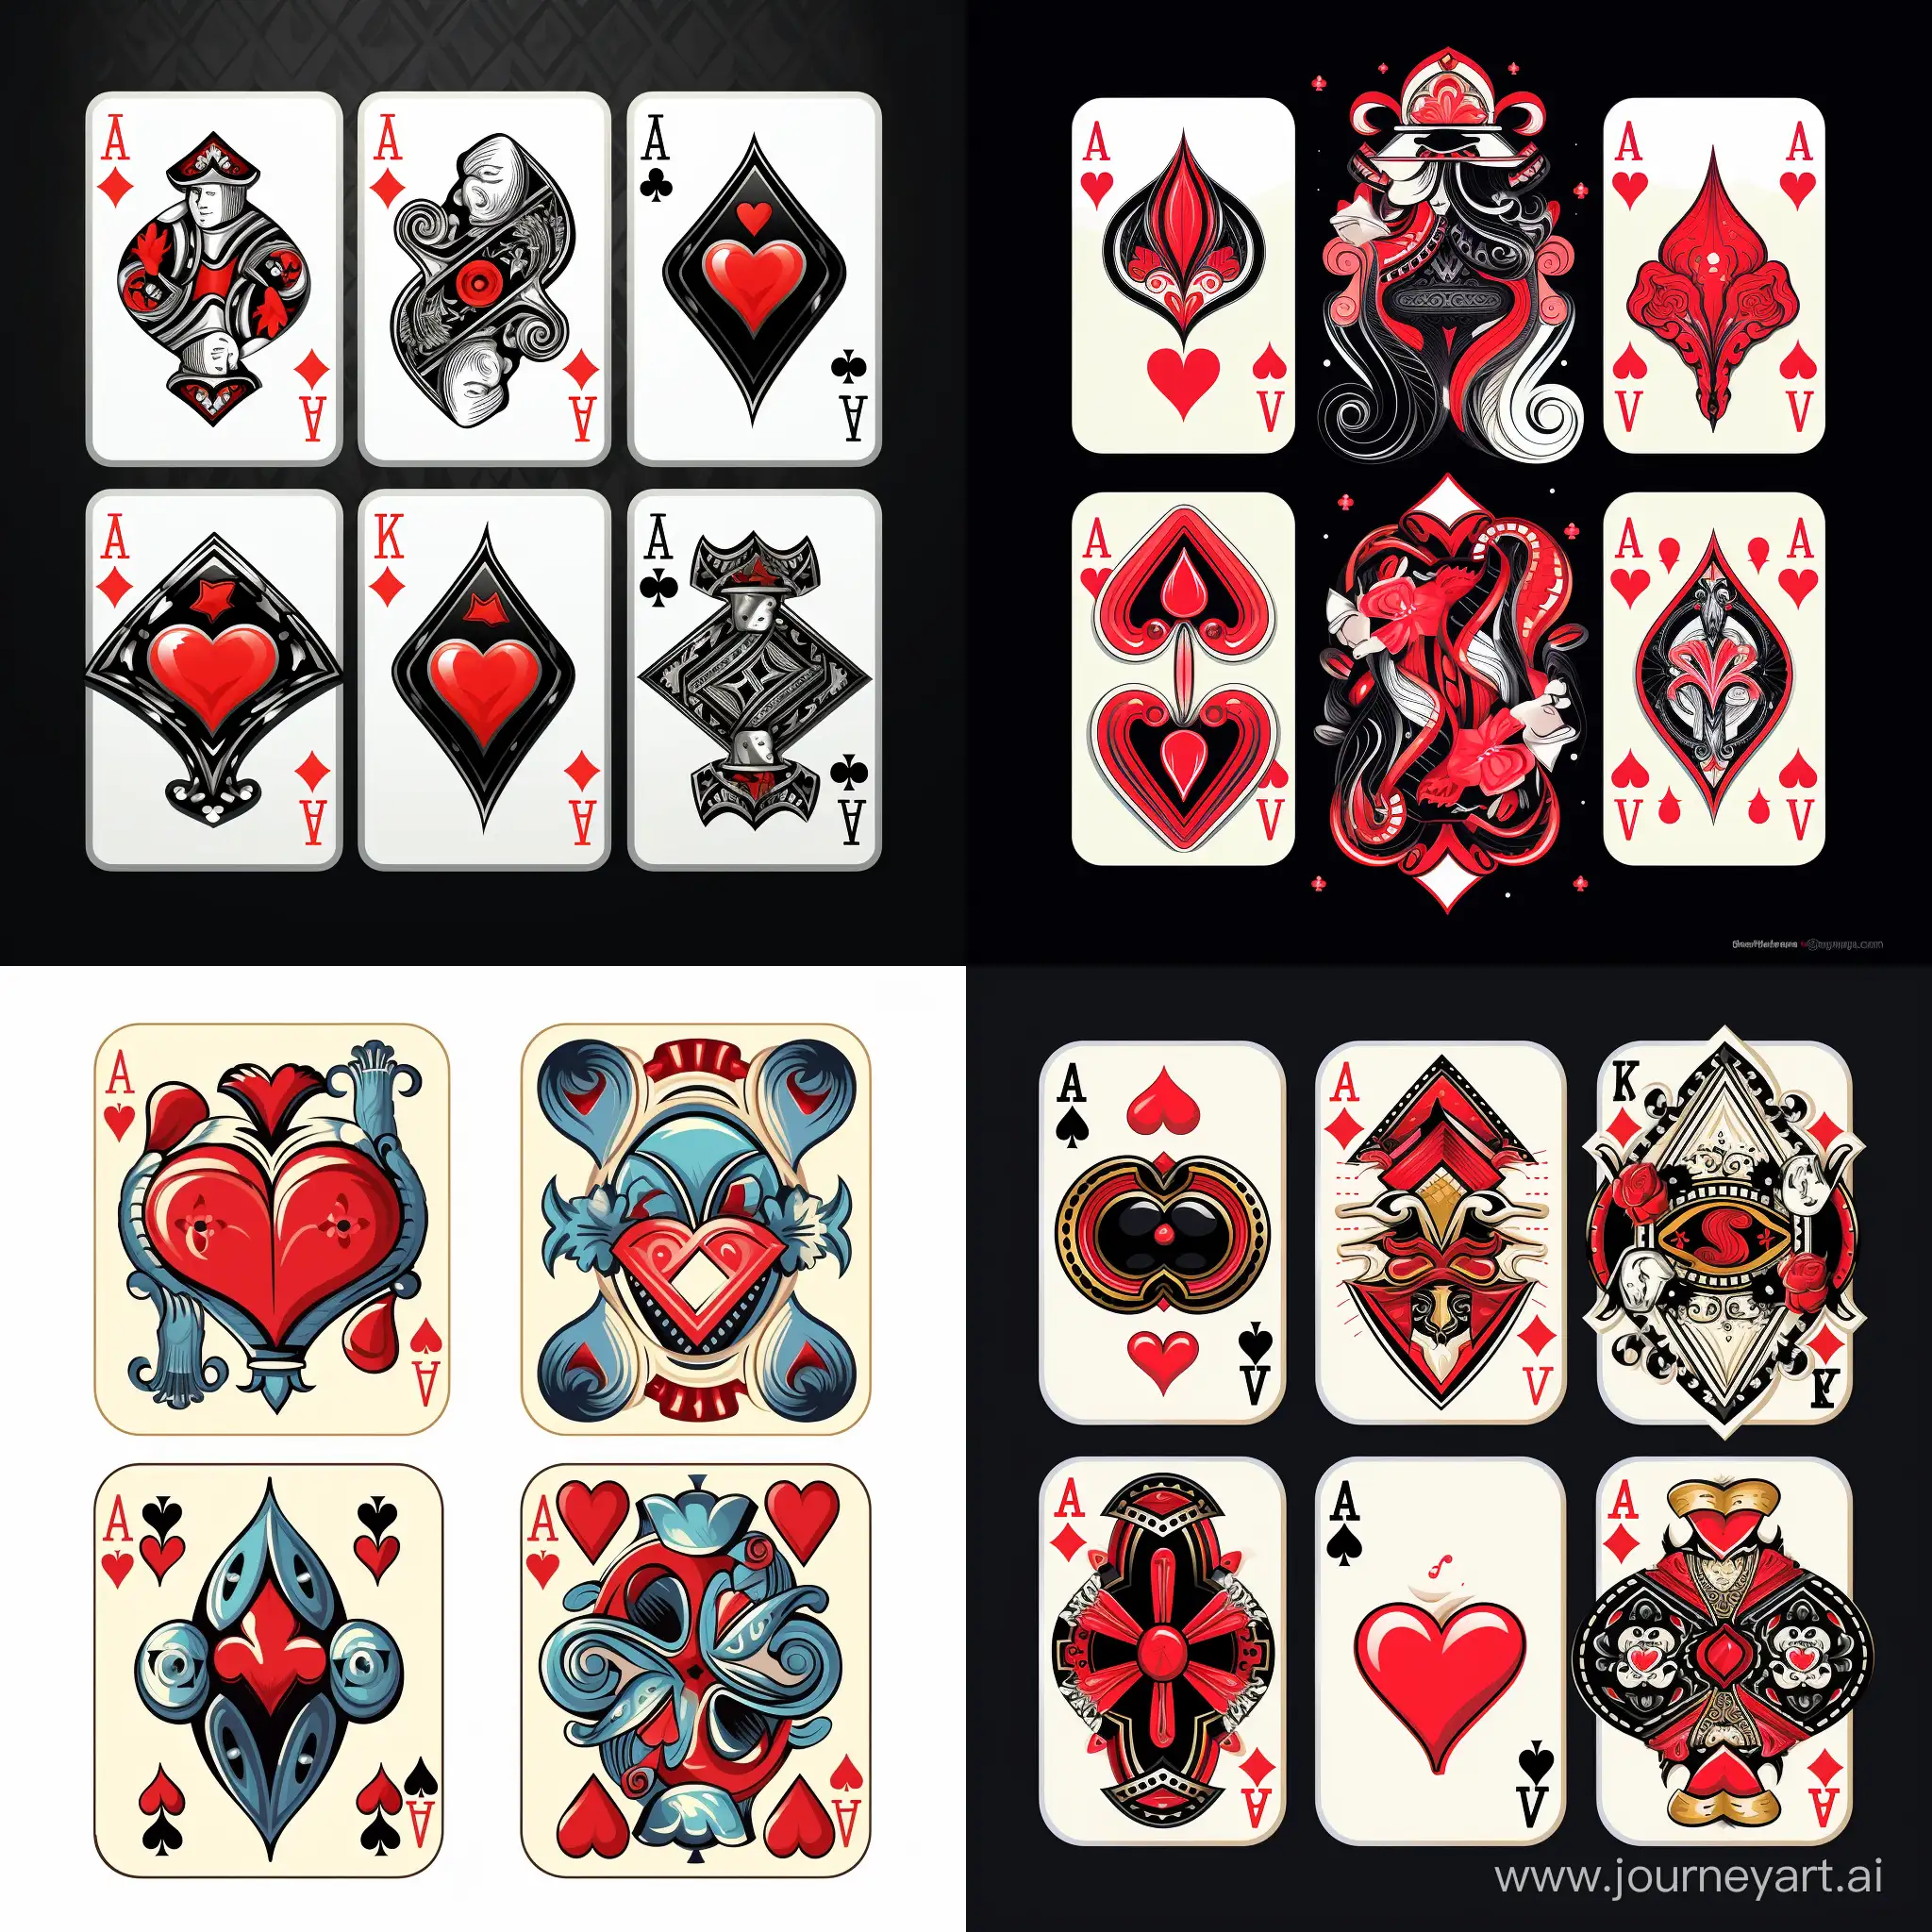 Playing-Card-Suit-Ornaments-in-Cartoon-and-Pop-Art-Style